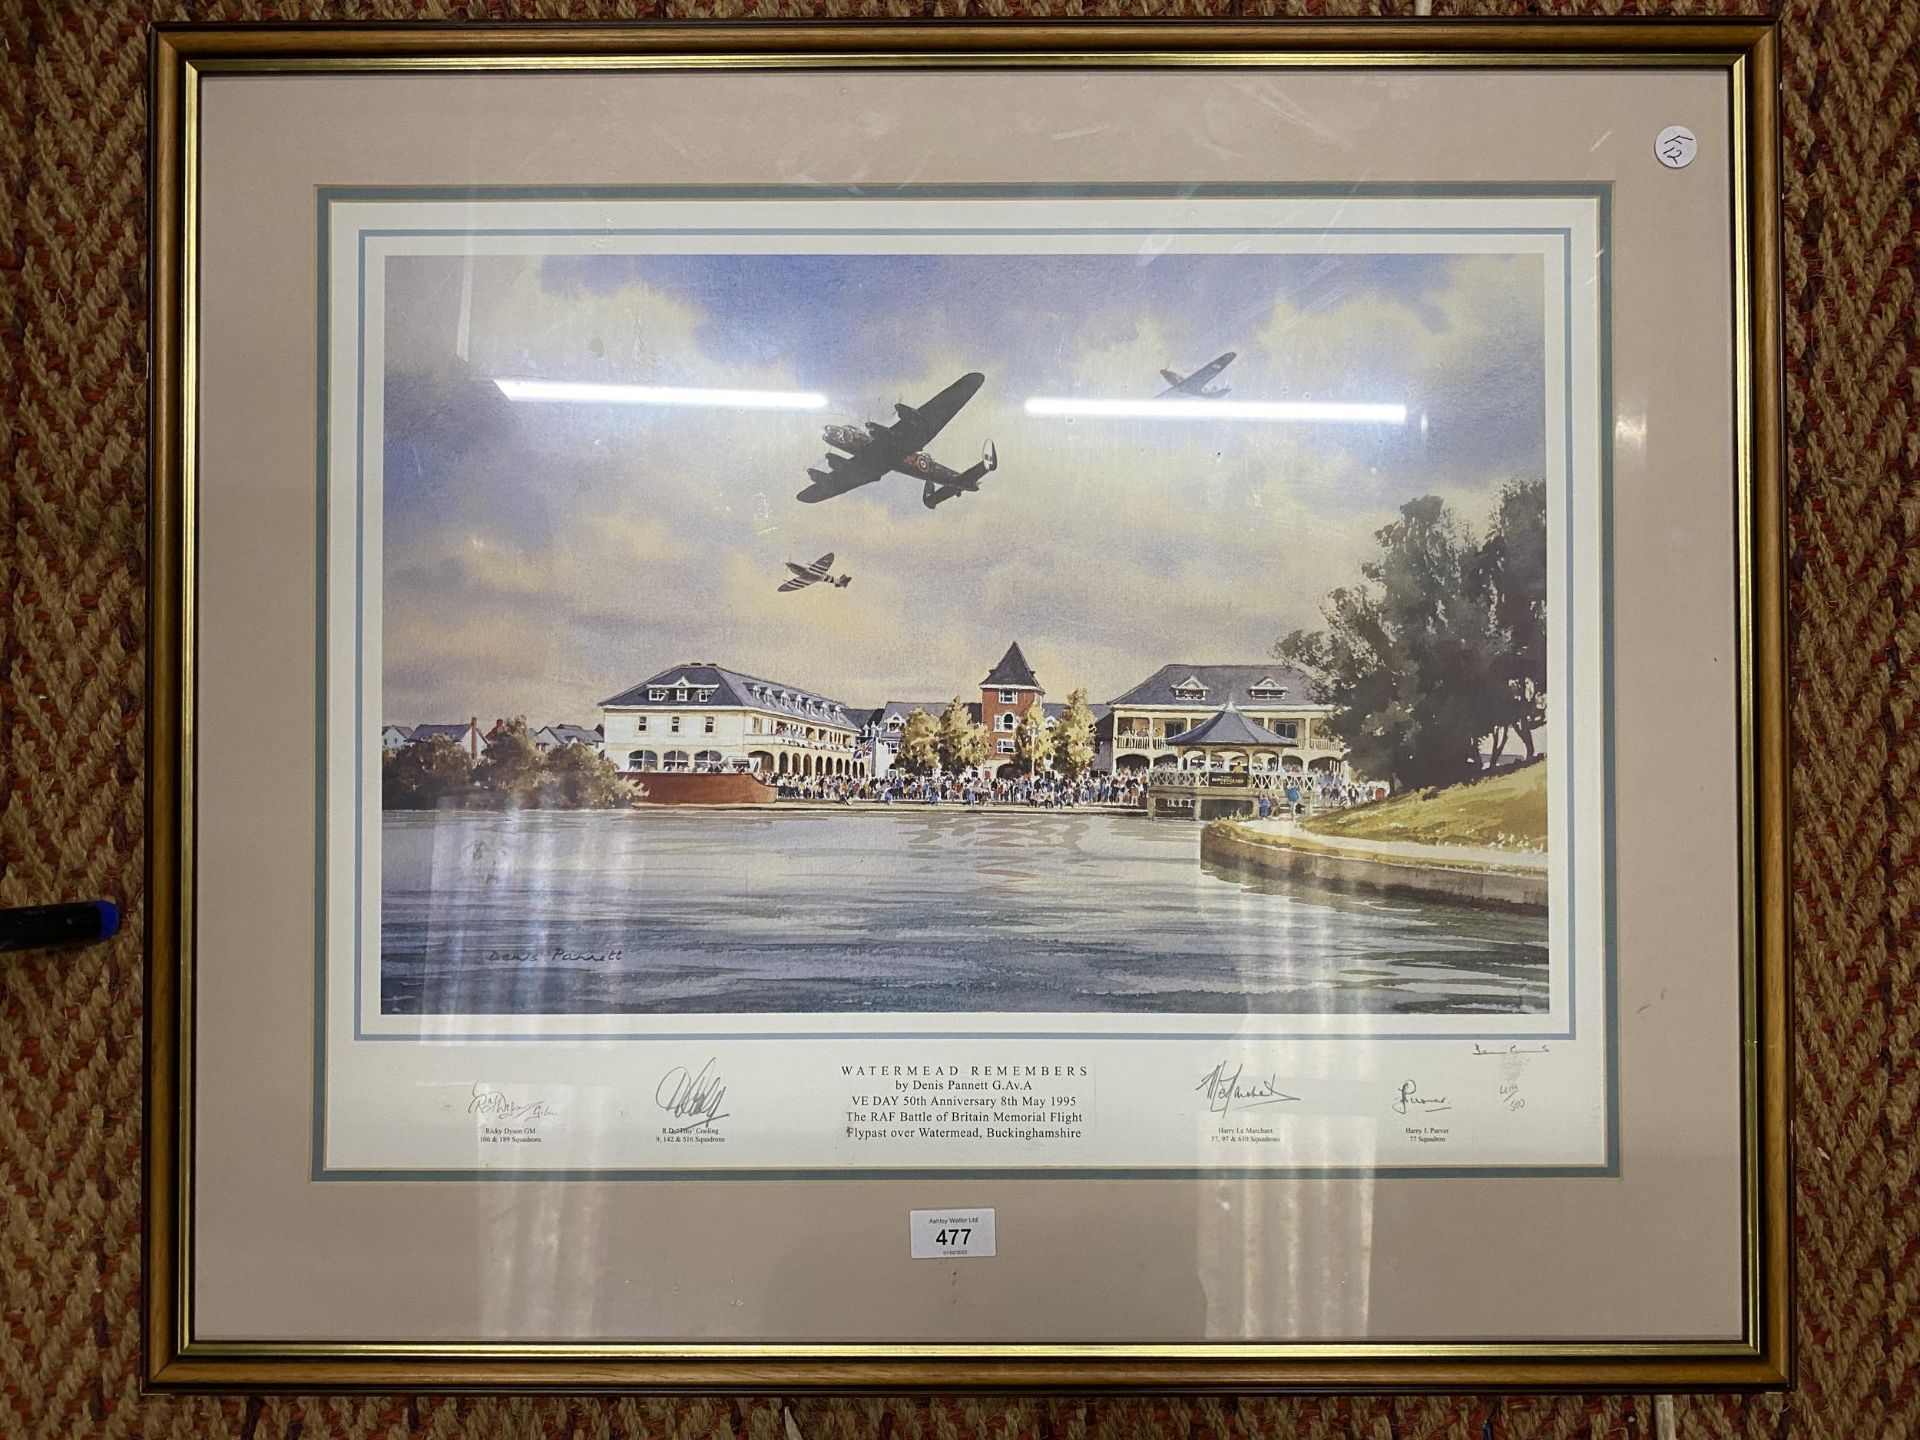 A LIMITED EDITION 414/500 SIGNED COLOUR PRINT OF "WATERMEAD REMEMBERS" DATED 1995, 45CM X 58CM